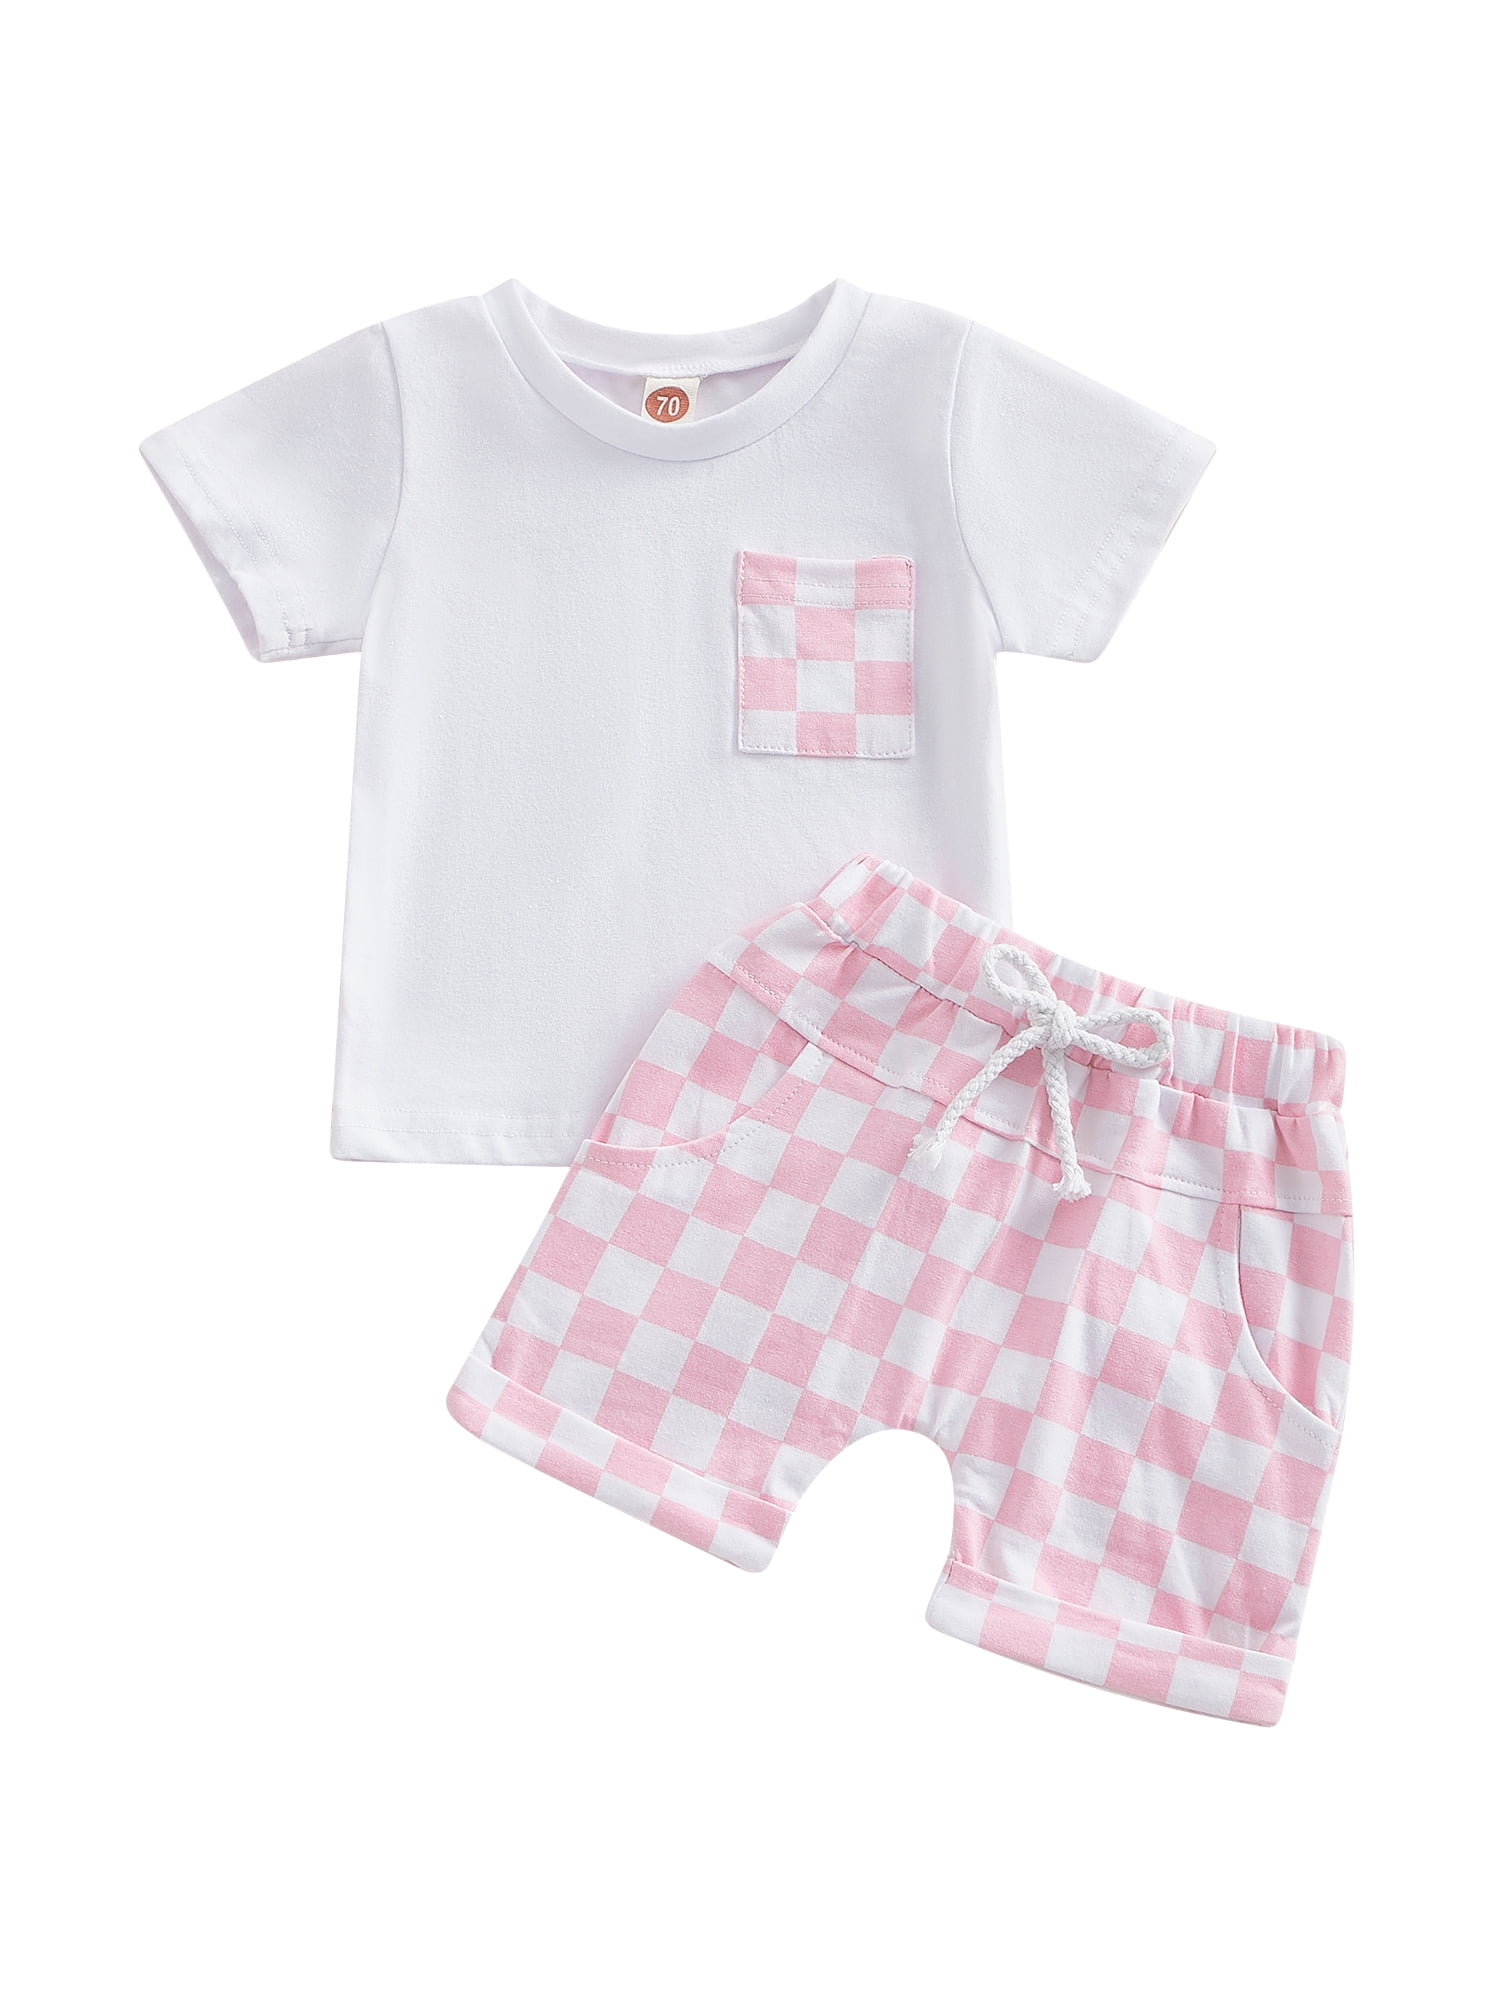 Wassery Toddler Baby Boy Summer Clothes Infant Checkerboard Short Sleeve  T-Shirt Plaid Shorts Set 2PCS Checkered Outfit 0-3T 